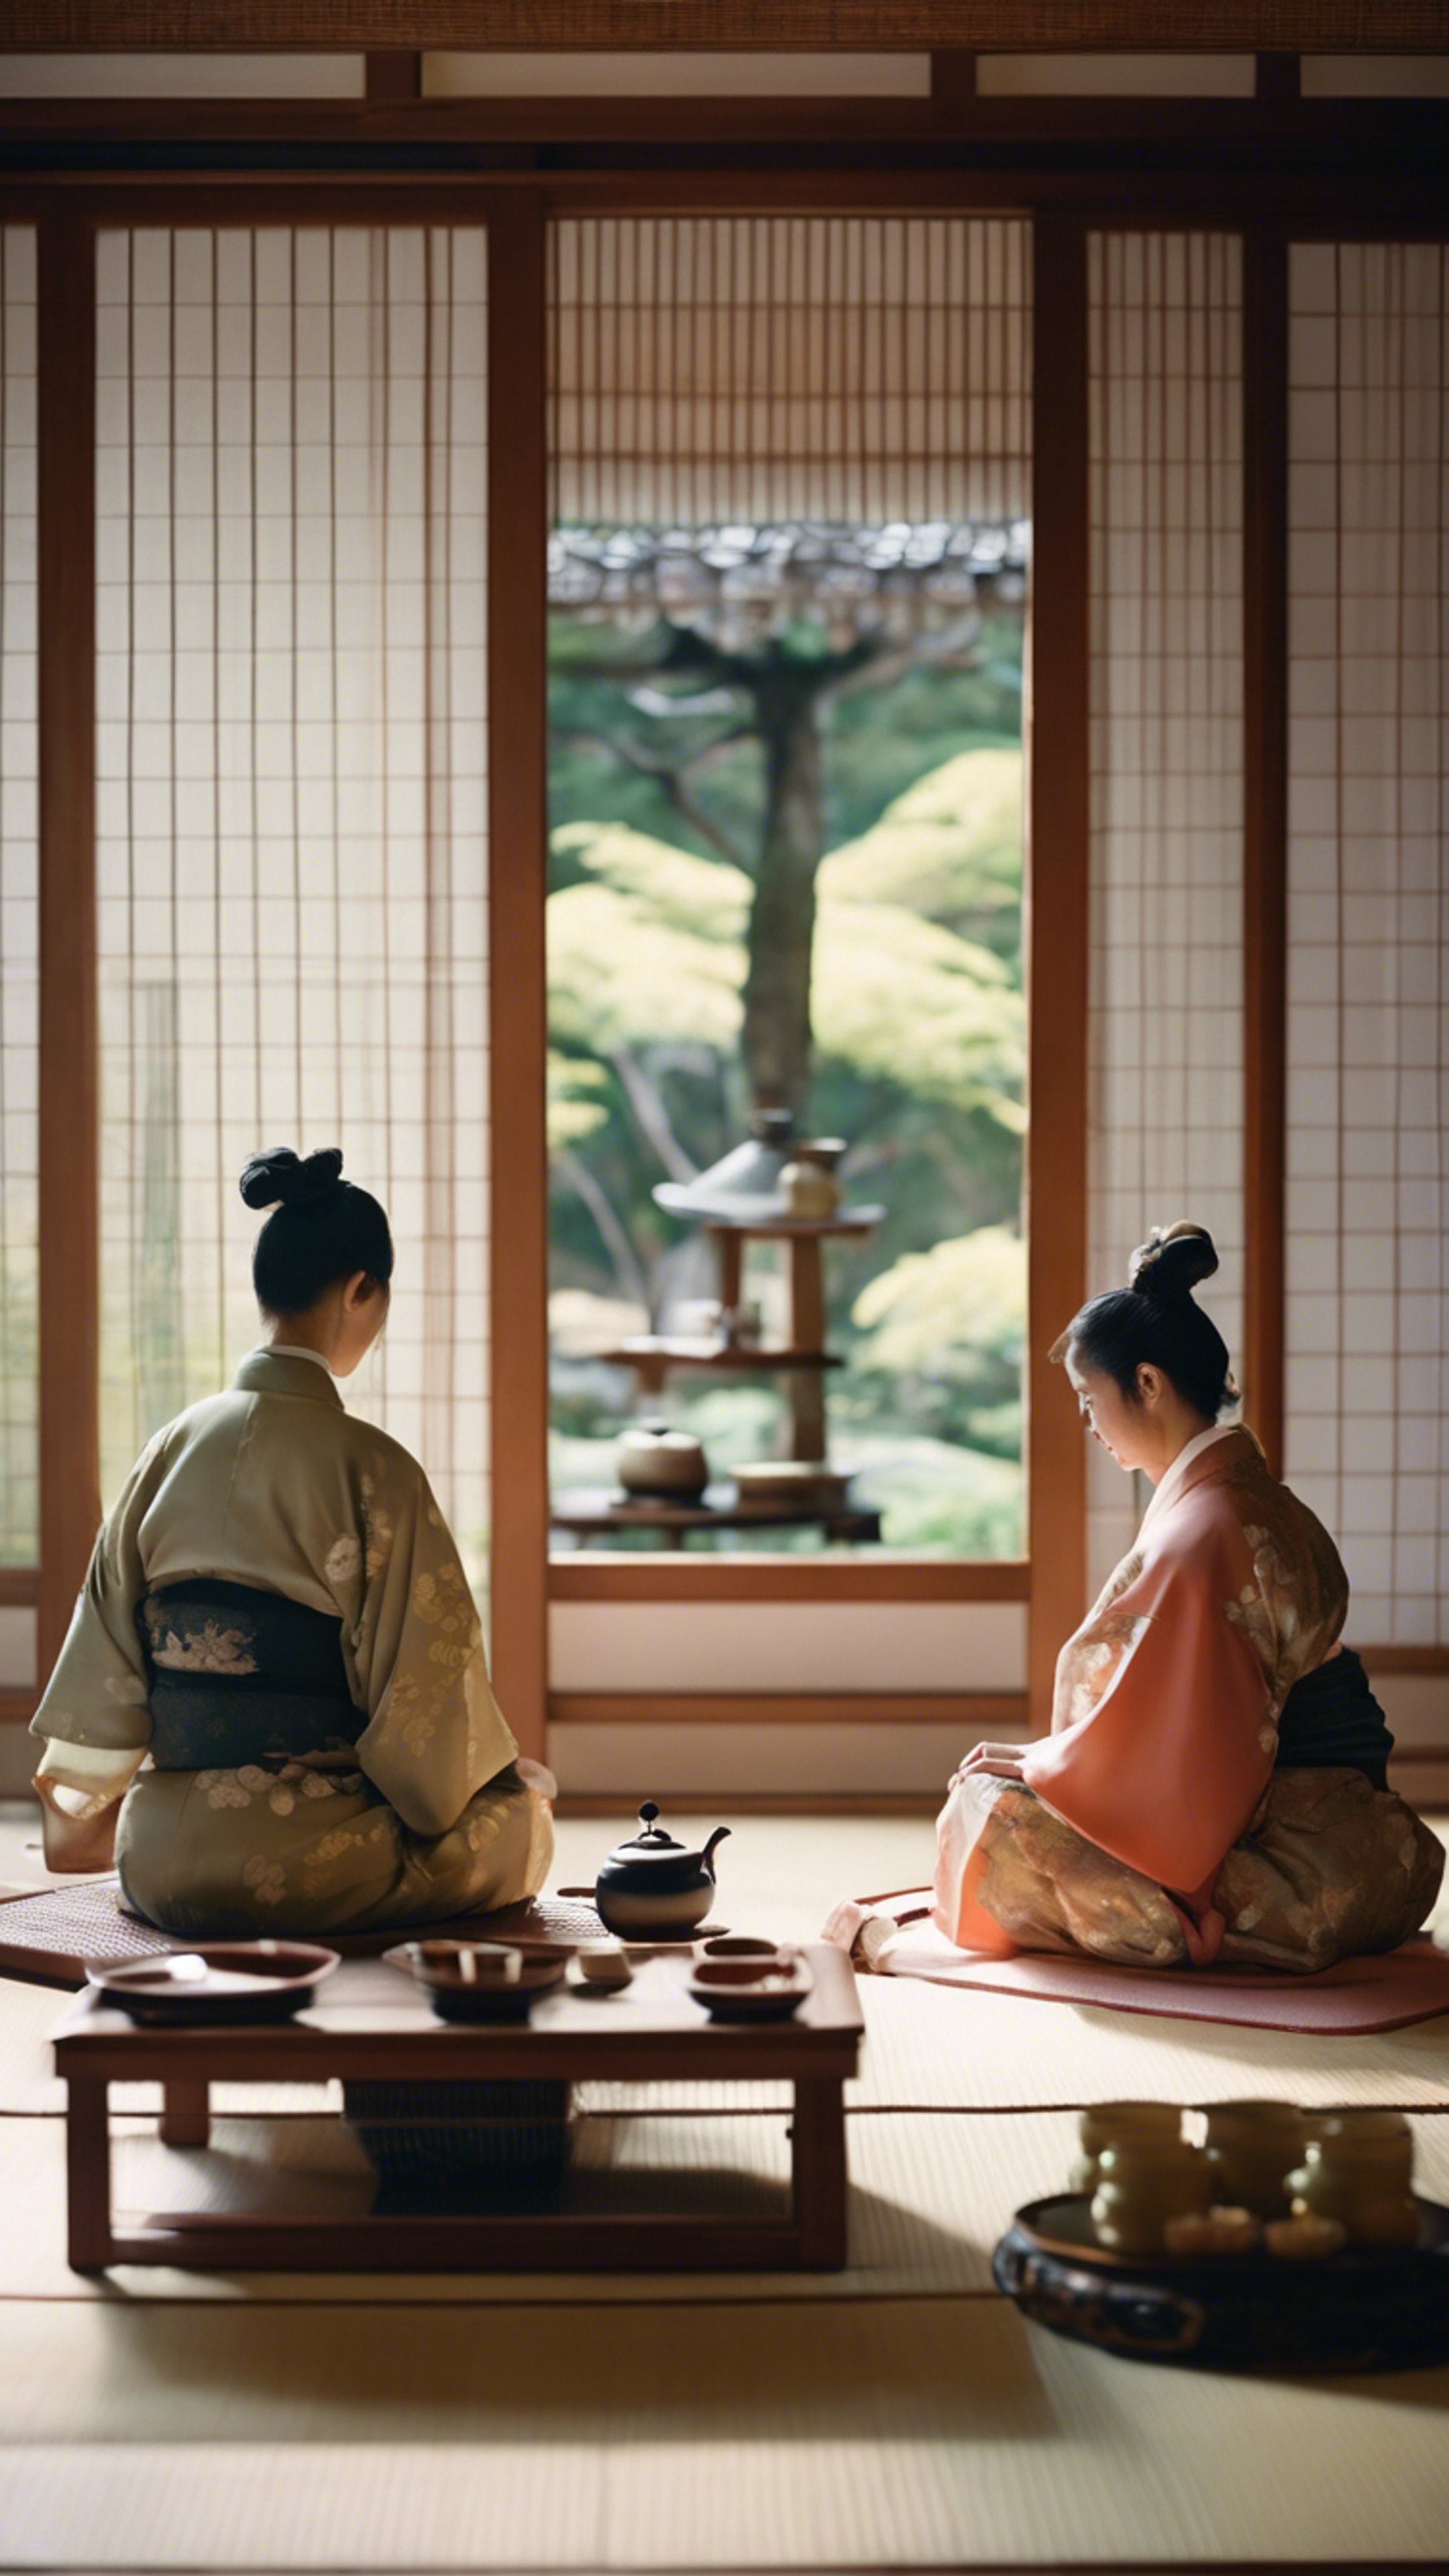 A peaceful traditional Japanese tea ceremony taking place in an ancient tea house, with the participants dressed in silk kimonos. Wallpaper[98a170067e414d32abbc]